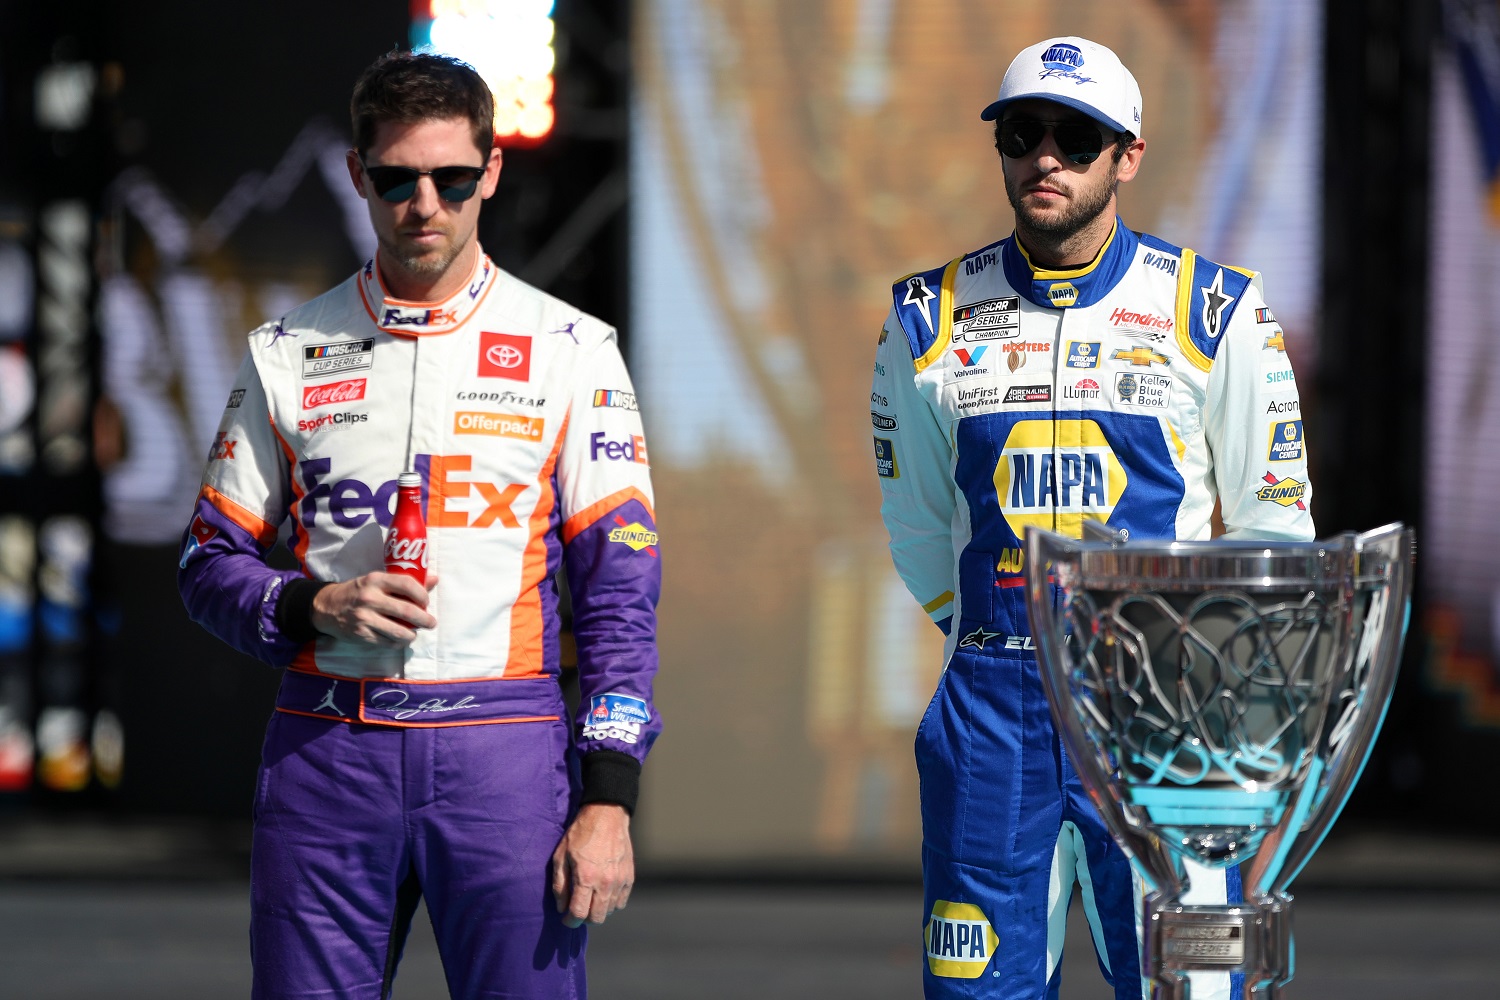 NASCAR Cup Series Championship 4 drivers Denny Hamlin and Chase Elliott during pre-race ceremonies at the NASCAR Cup Series Championship at Phoenix Raceway on Nov. 7, 2021. | Meg Oliphant/Getty Images